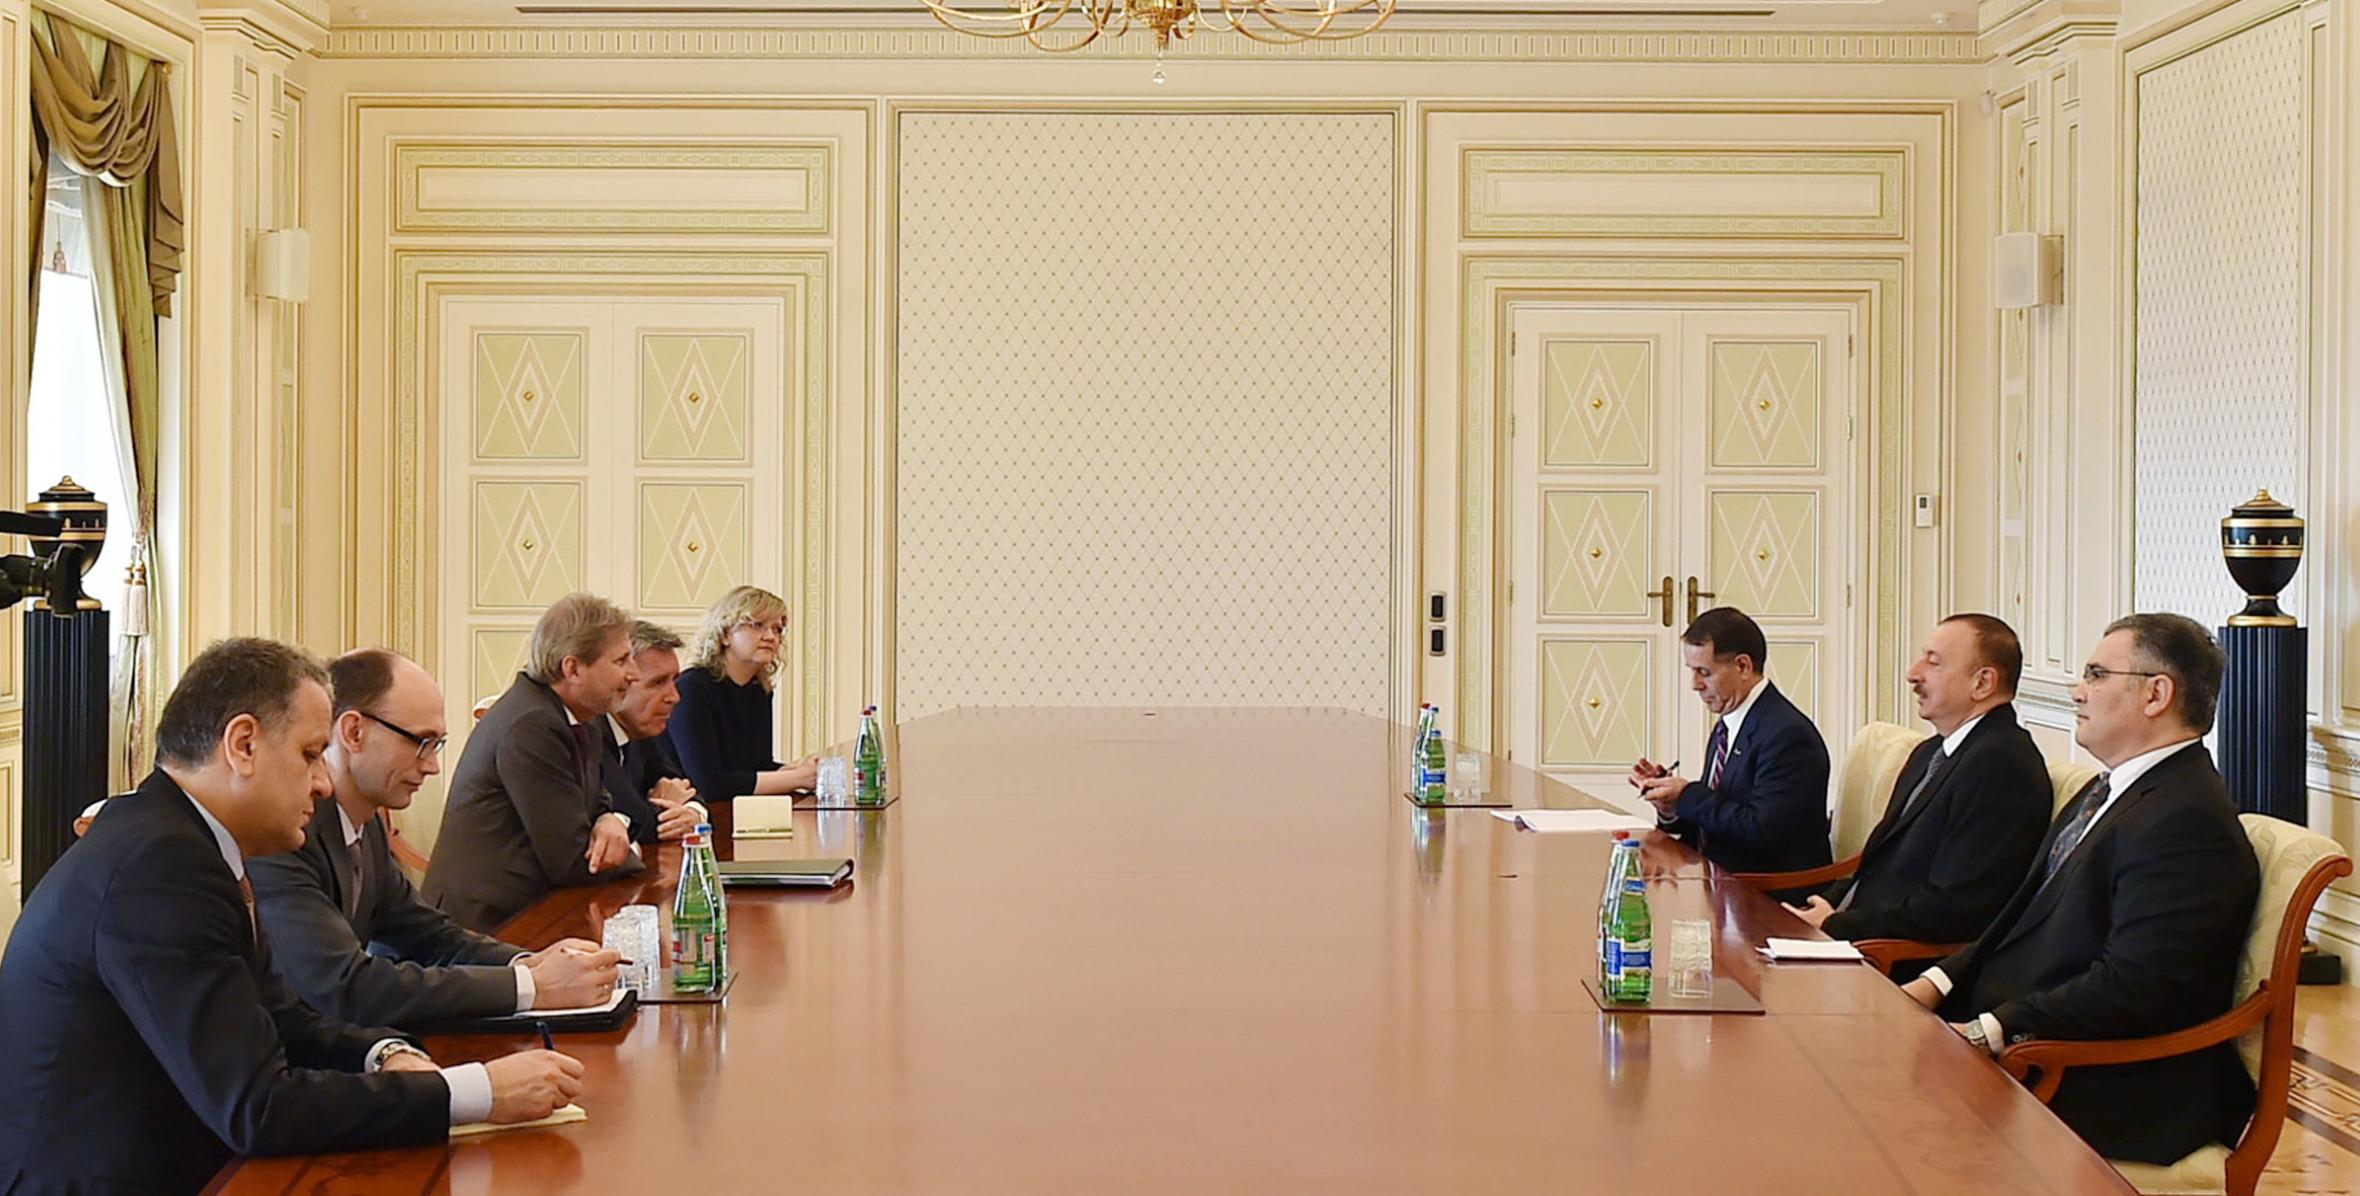 Ilham Aliyev received a delegation led by European Commissioner on Neighbourhood Policy and Enlargement Negotiations